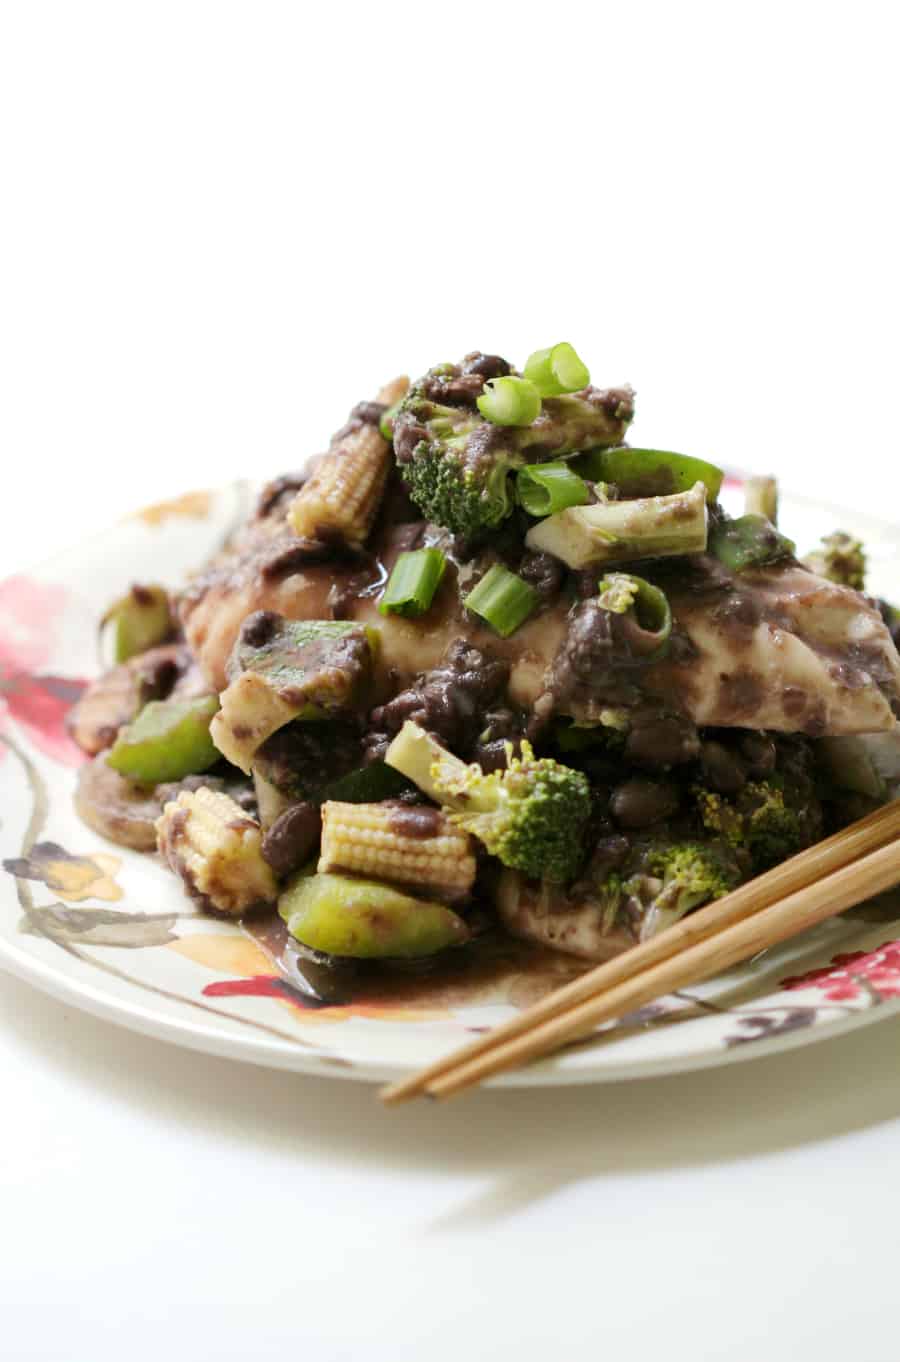 Black Bean Chicken & Vegetables (Gluten-Free, Allergy-Free) | Strength and Sunshine @RebeccaGF666 A healthy & easy recipe for Black Bean Chicken & Vegetables that's gluten-free and allergy-free. A homemade black bean sauce, Asian vegetables, and chicken tenders guarantee a delicious crowd-pleasing weeknight dinner! 
